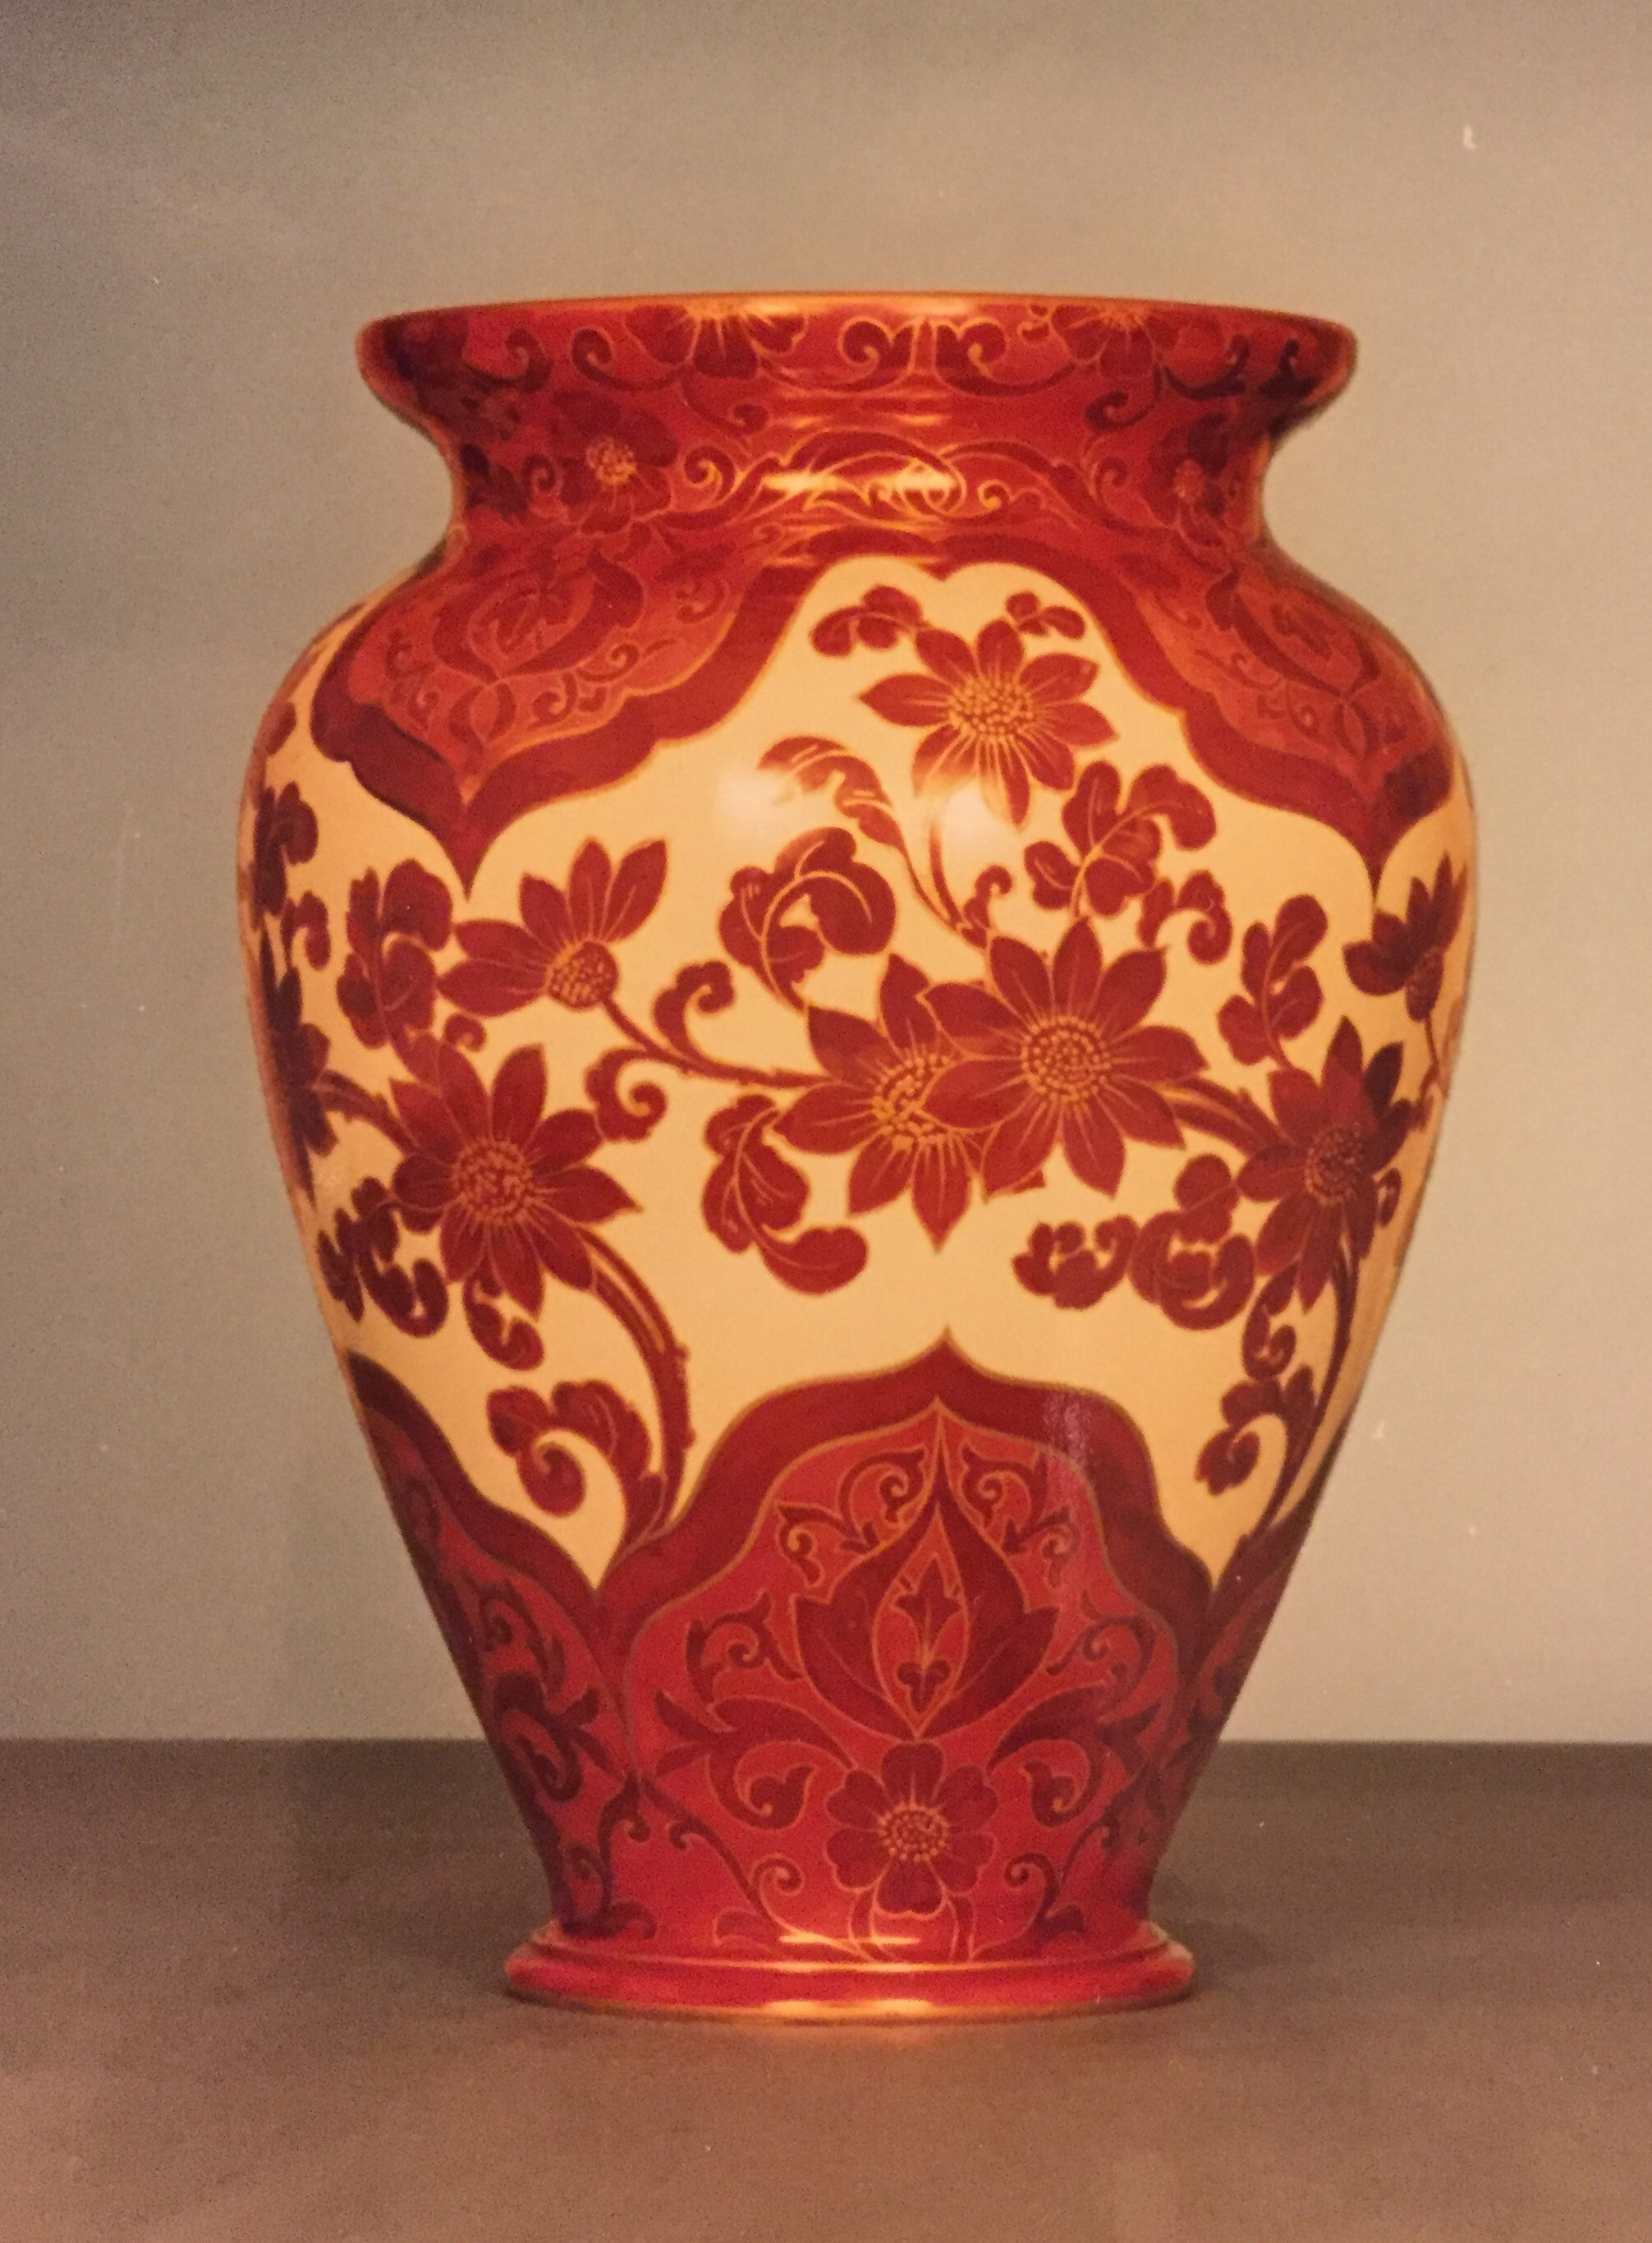 26 Recommended Royal Doulton Vase 2024 free download royal doulton vase of burslem doultoncollectorsclub with at the time doulton at nile street only had an earthenware body to use as a medium which fortunately suited slaters revival of the ce